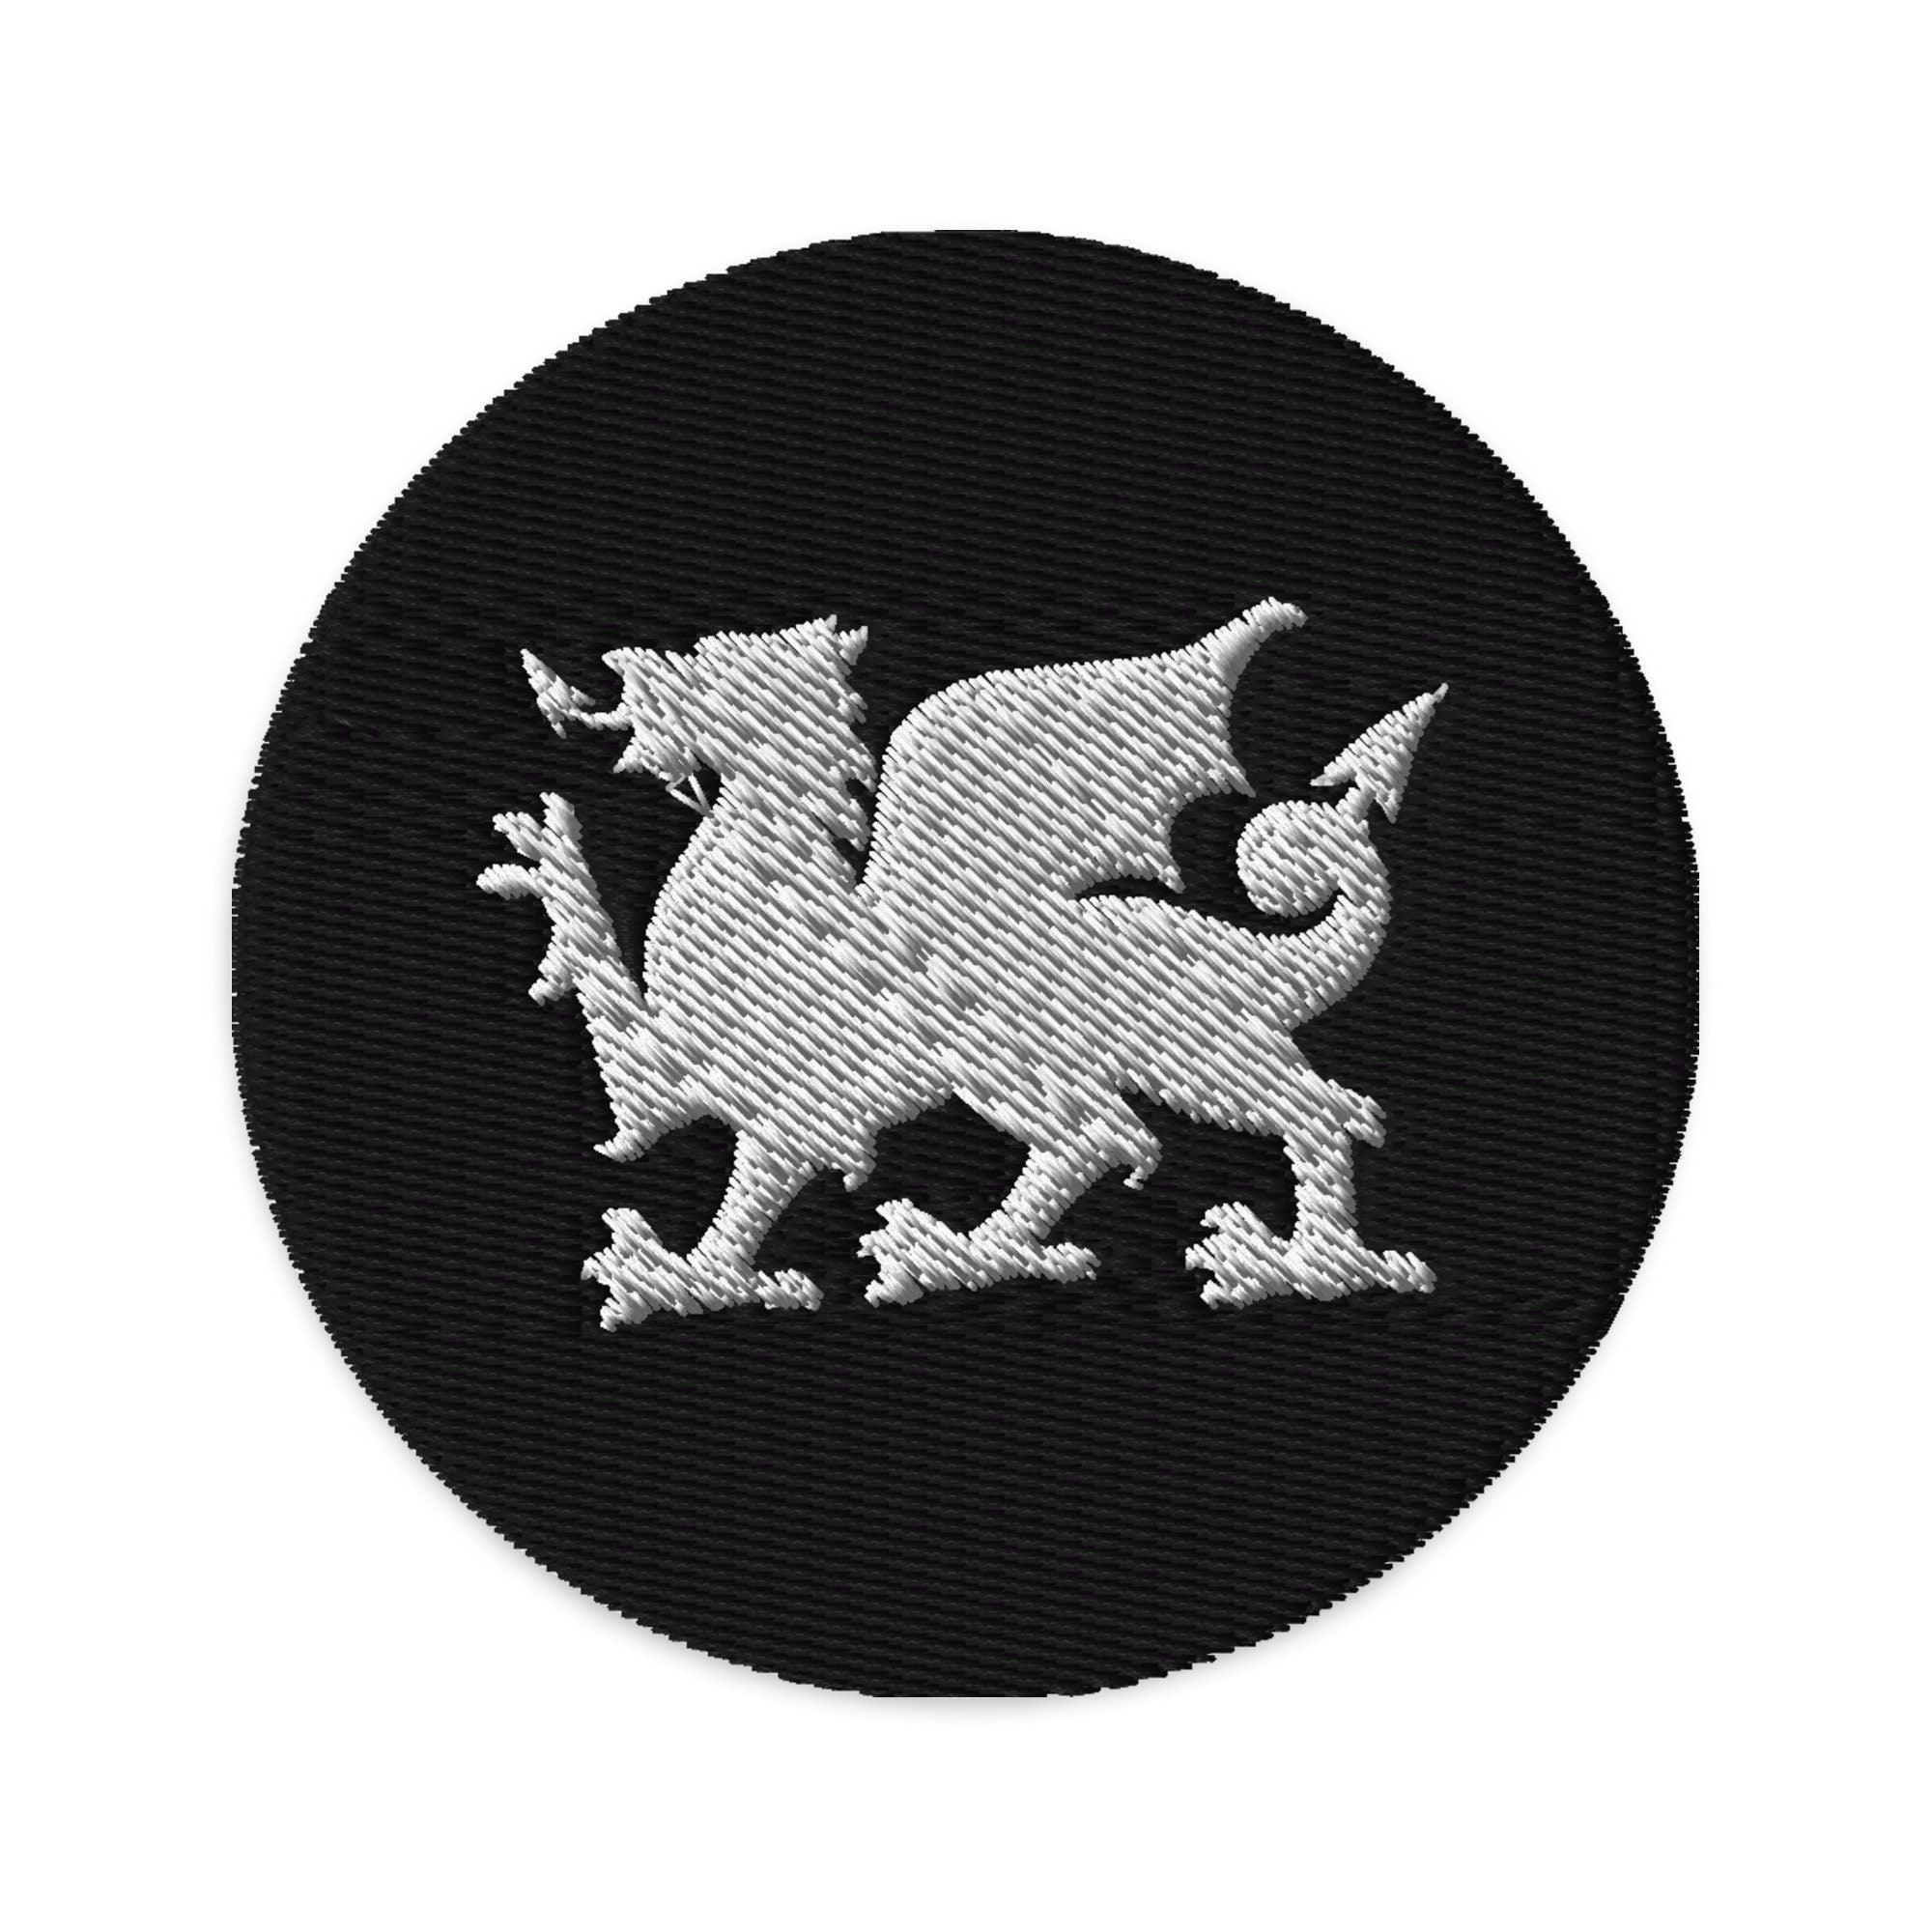 Wales Embroidered Patch, 3" Welsh Flag Patch, Circular Wales Patch Embroidery, Iron on/Sew on Patch Embroidery, Pilipinas